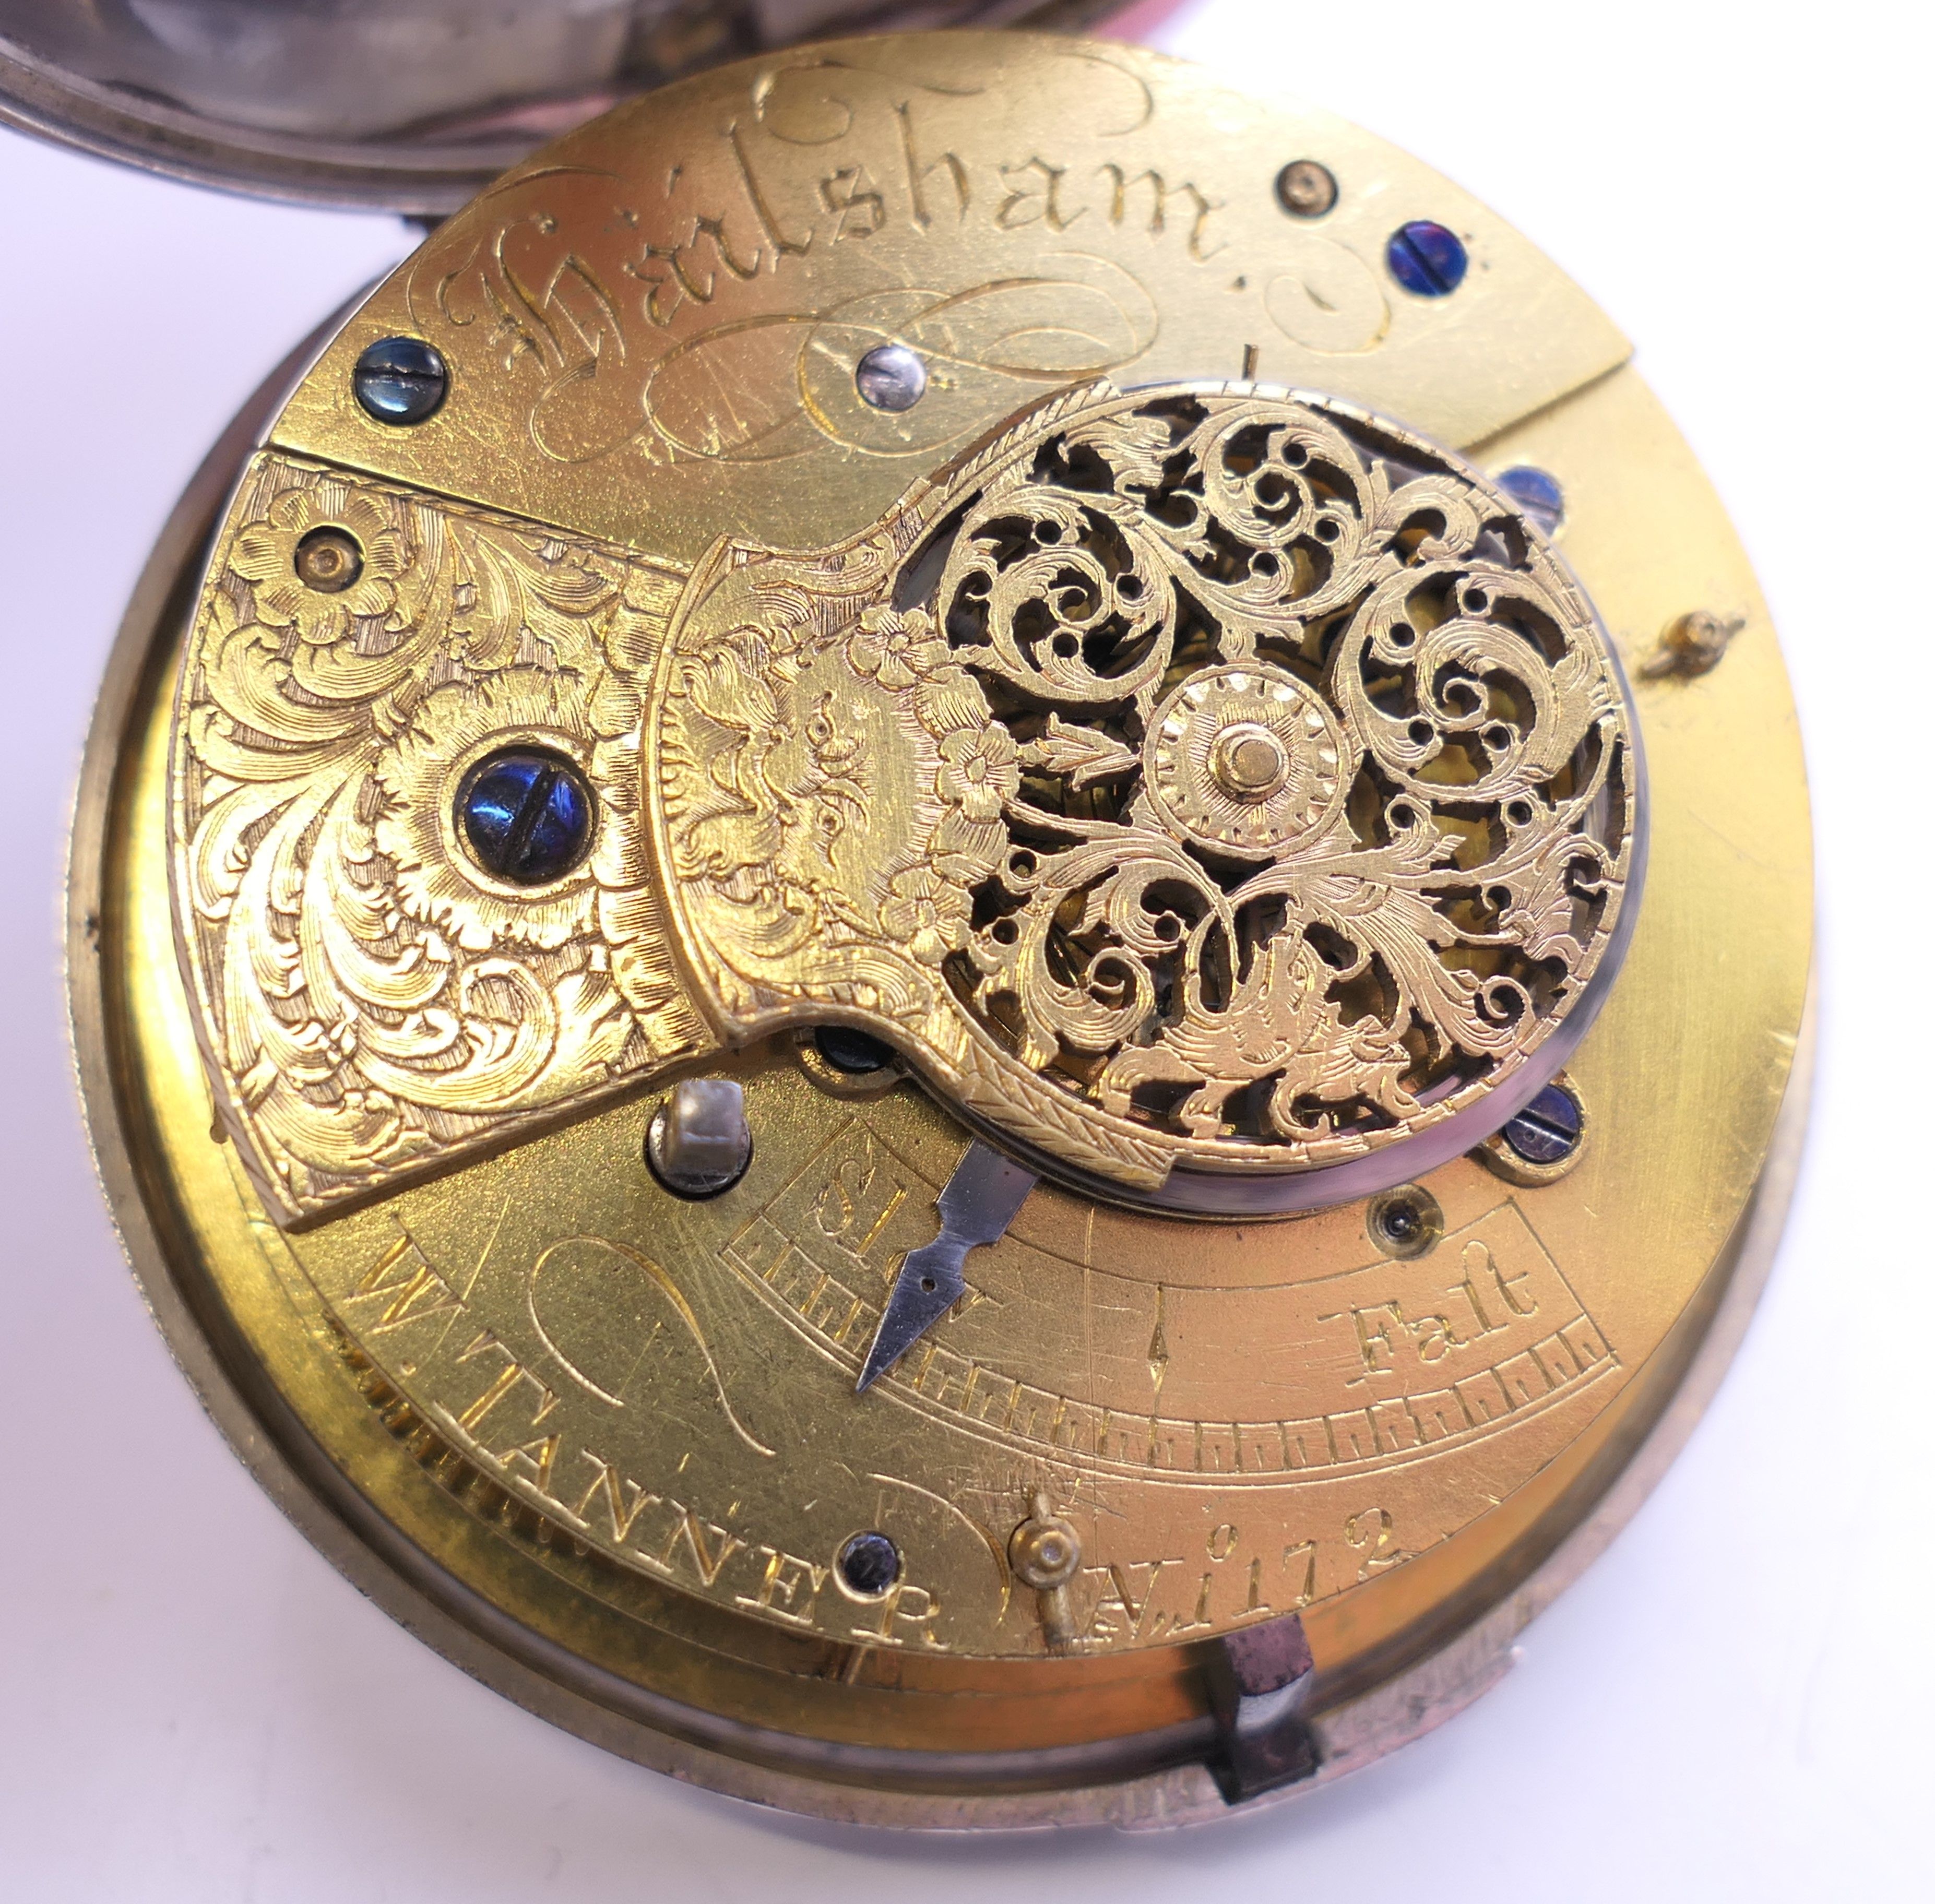 A W Tanner Watchmaker silver pair cased pocket watch, hallmarked Chester 1876, serial number 172. - Image 8 of 10